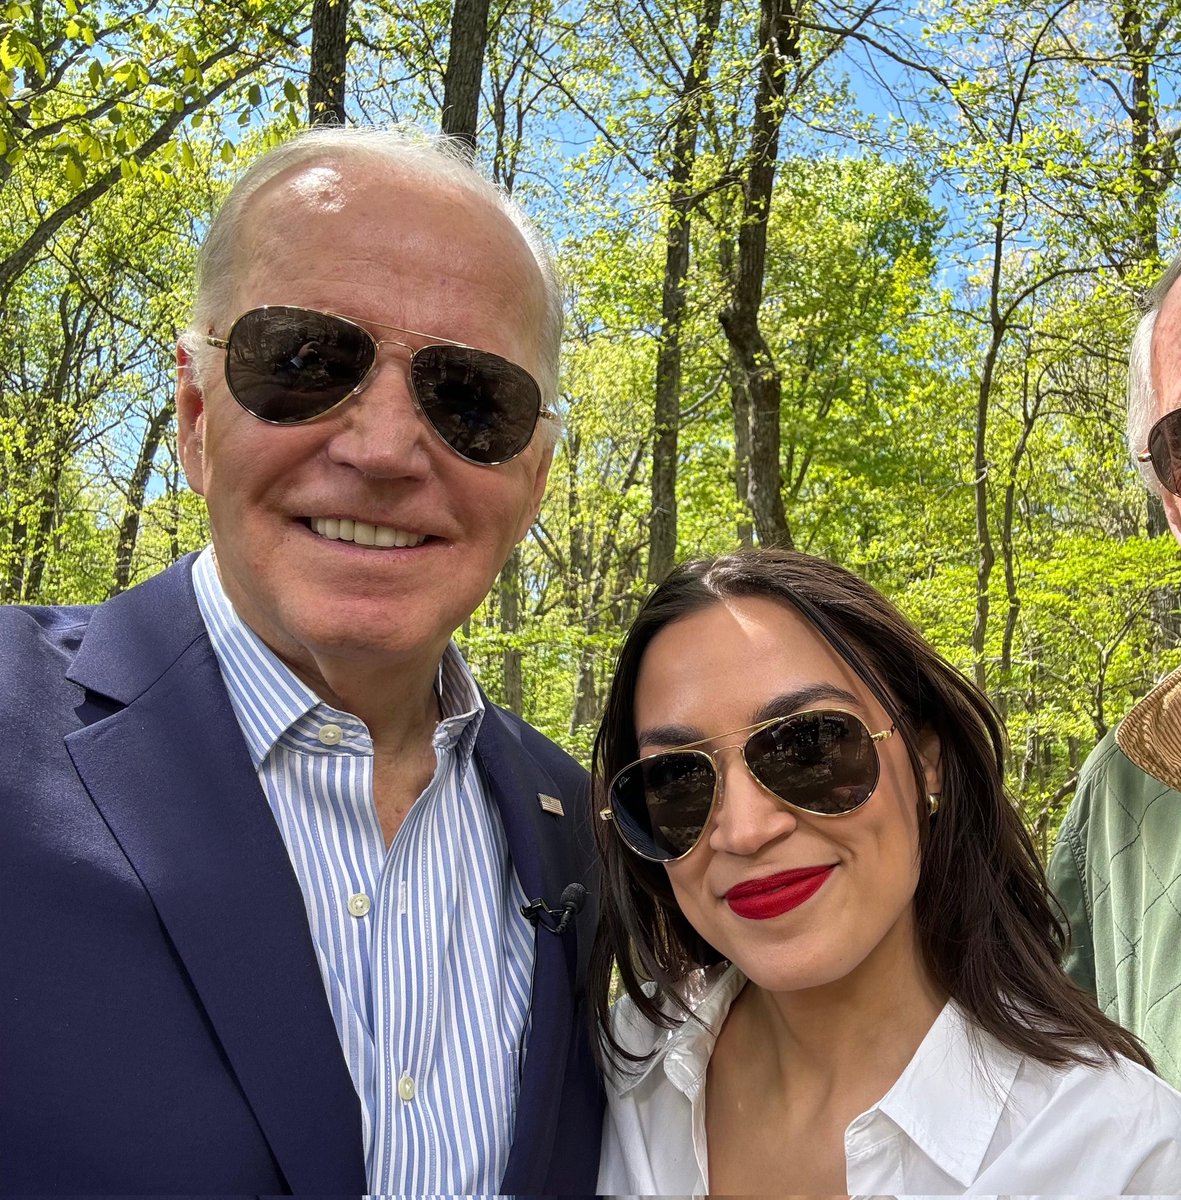 Genocide Grandpa and his diversity sellout wear matching aviator sunglasses to hide the snake eyes